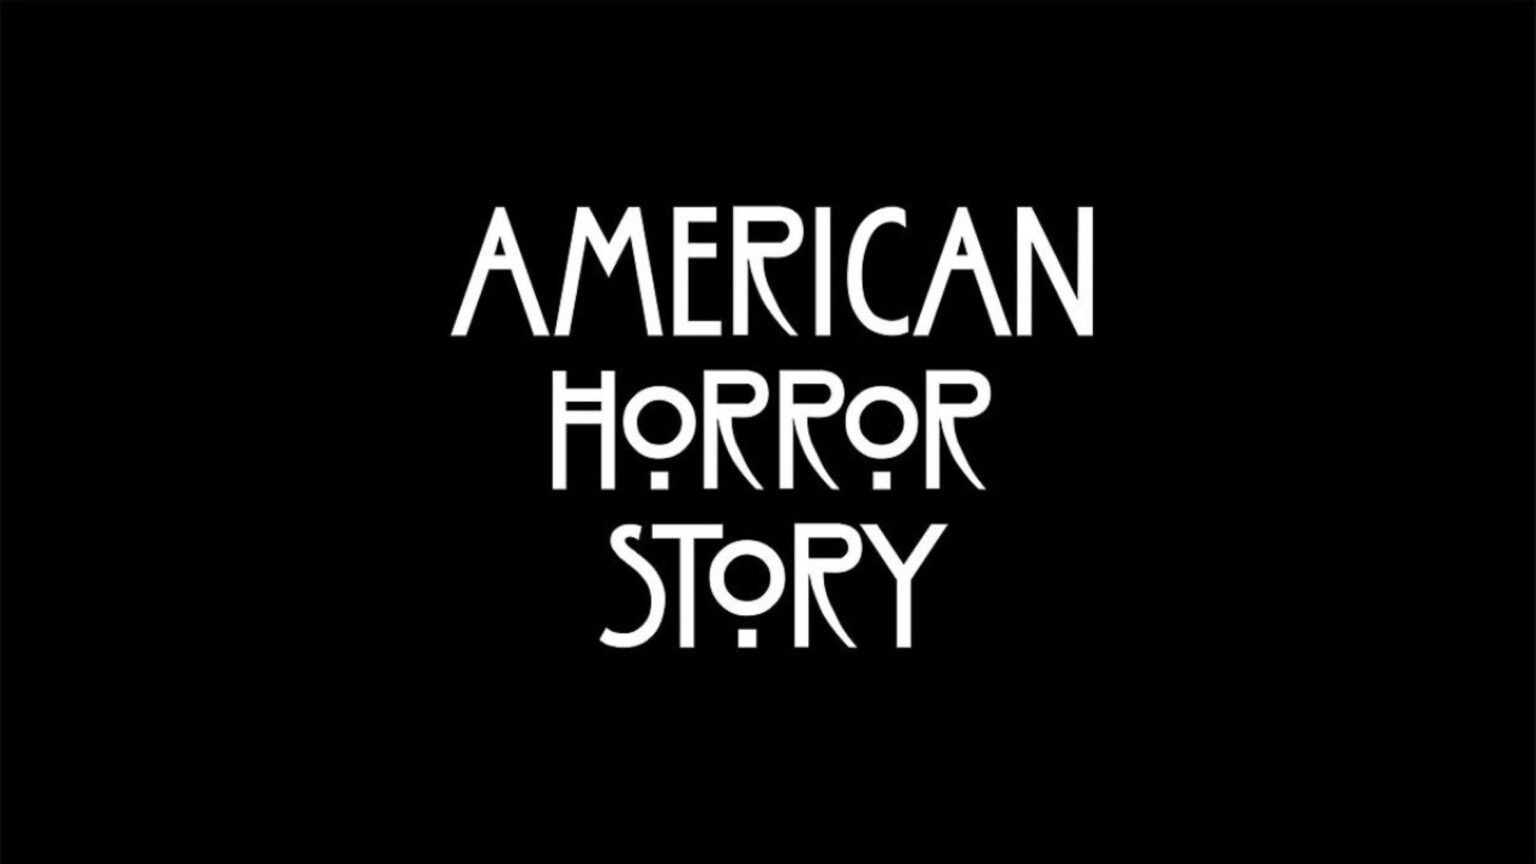 Over 10 seasons of 'American Horror Story', there has been some crazy stuff aired. Not even Macauley Culkin & Kathy Bates having sex can come close.